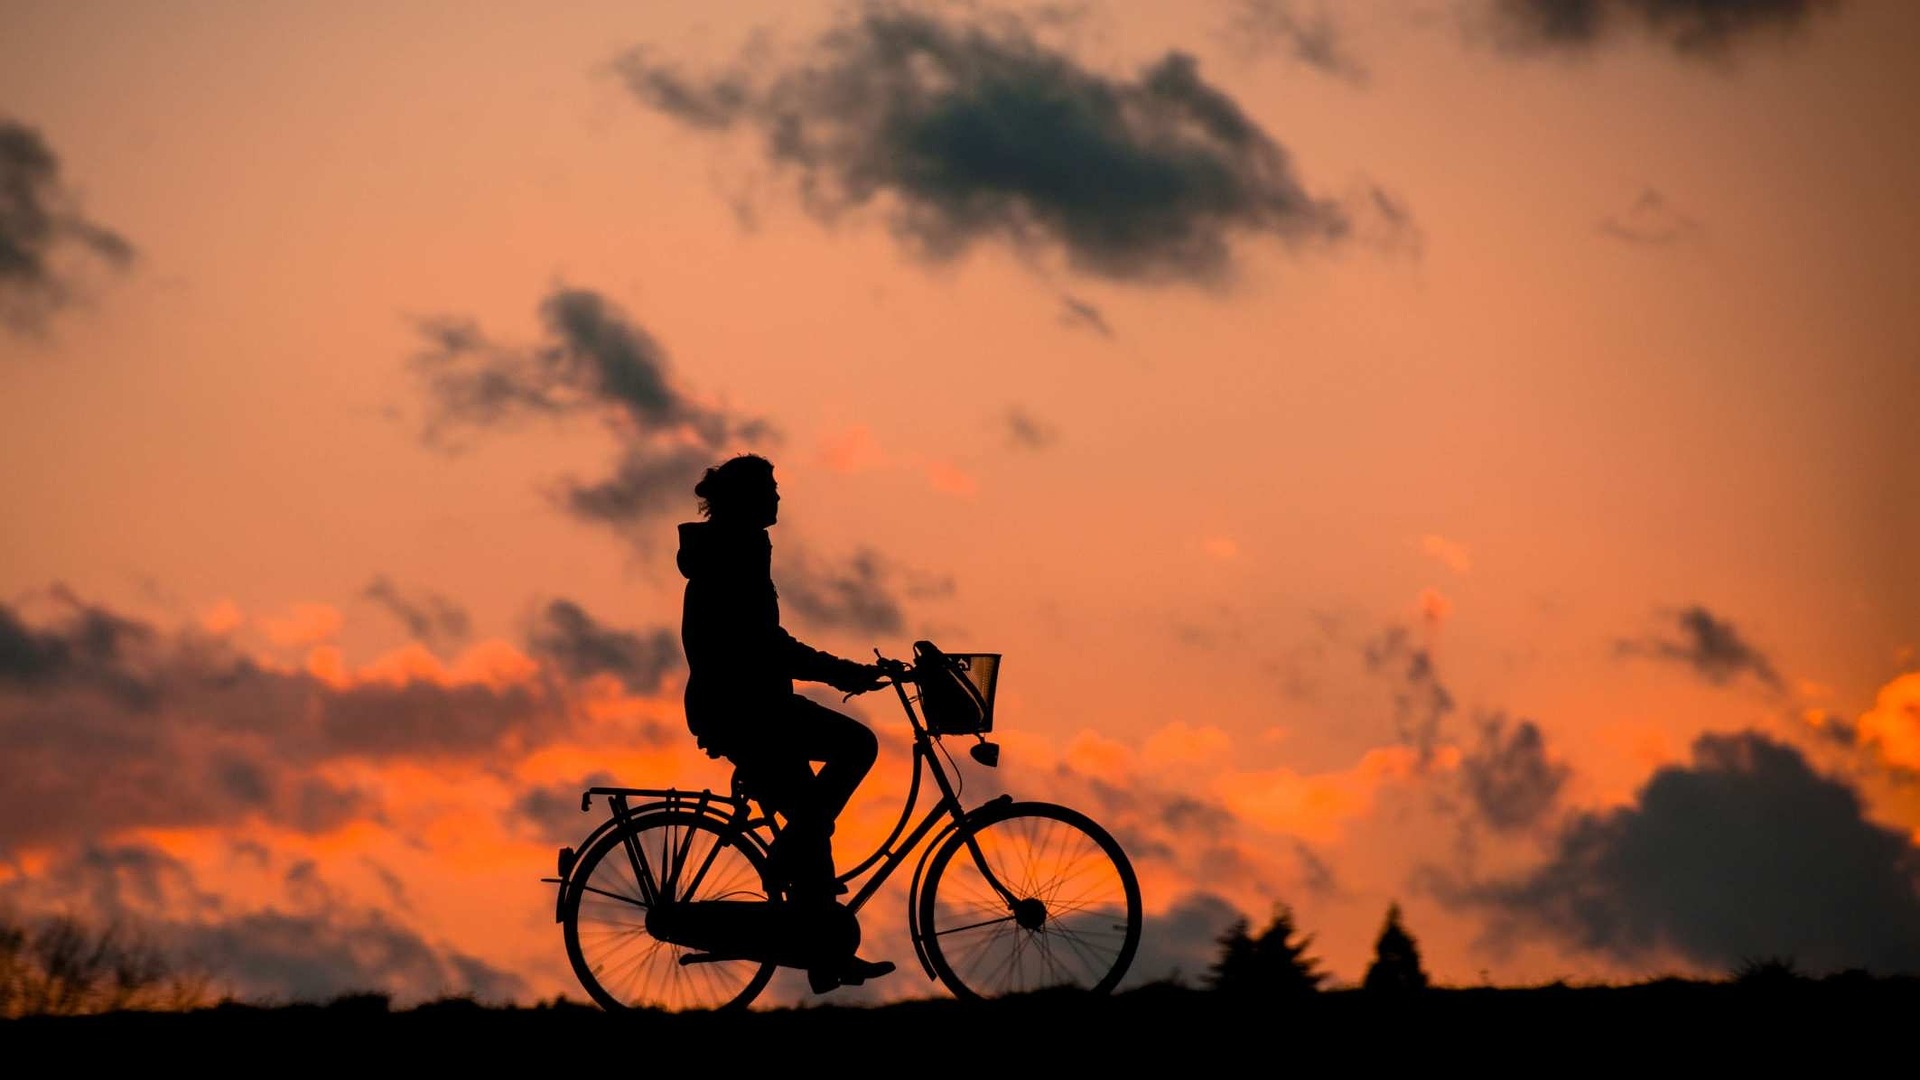 A man riding a bike and the sun is setting